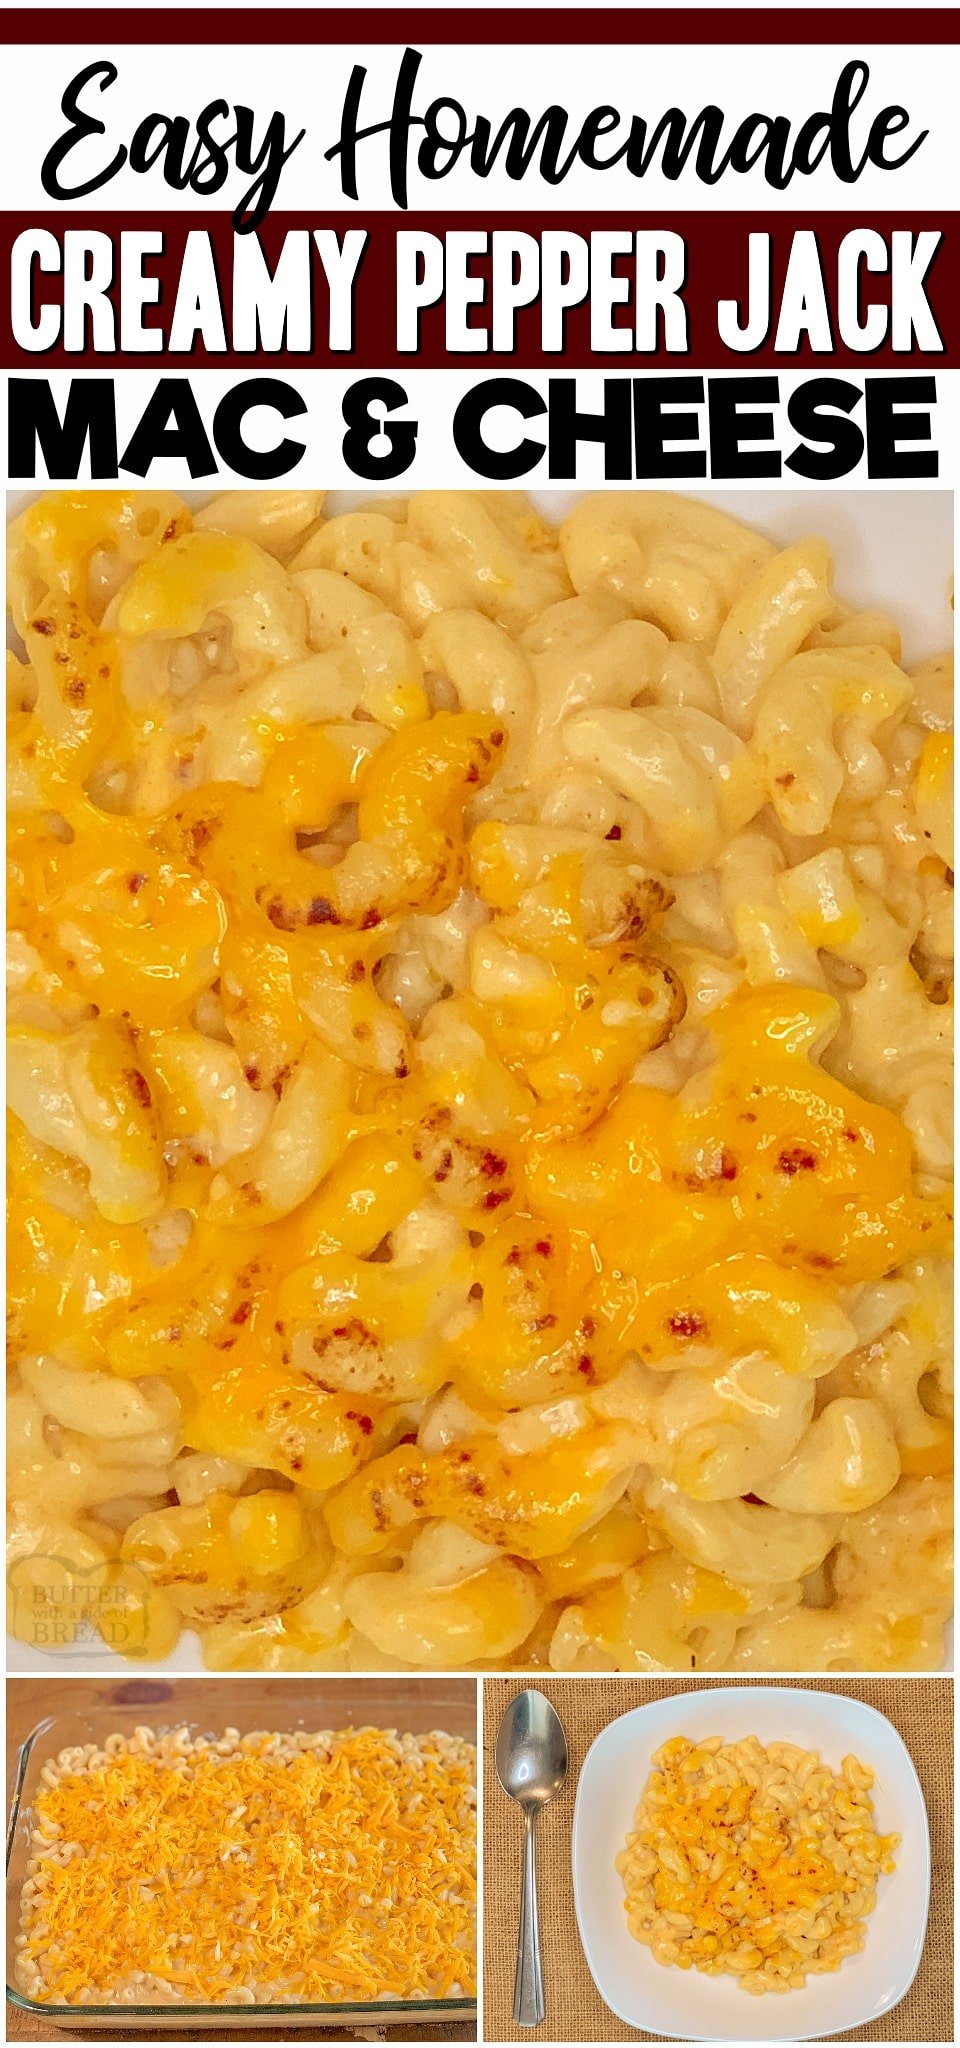 Pepper Jack Mac and Cheese is macaroni with a kick! This 3-cheese homemade mac and cheese recipe is quick & easy enough for weeknight dinner. 